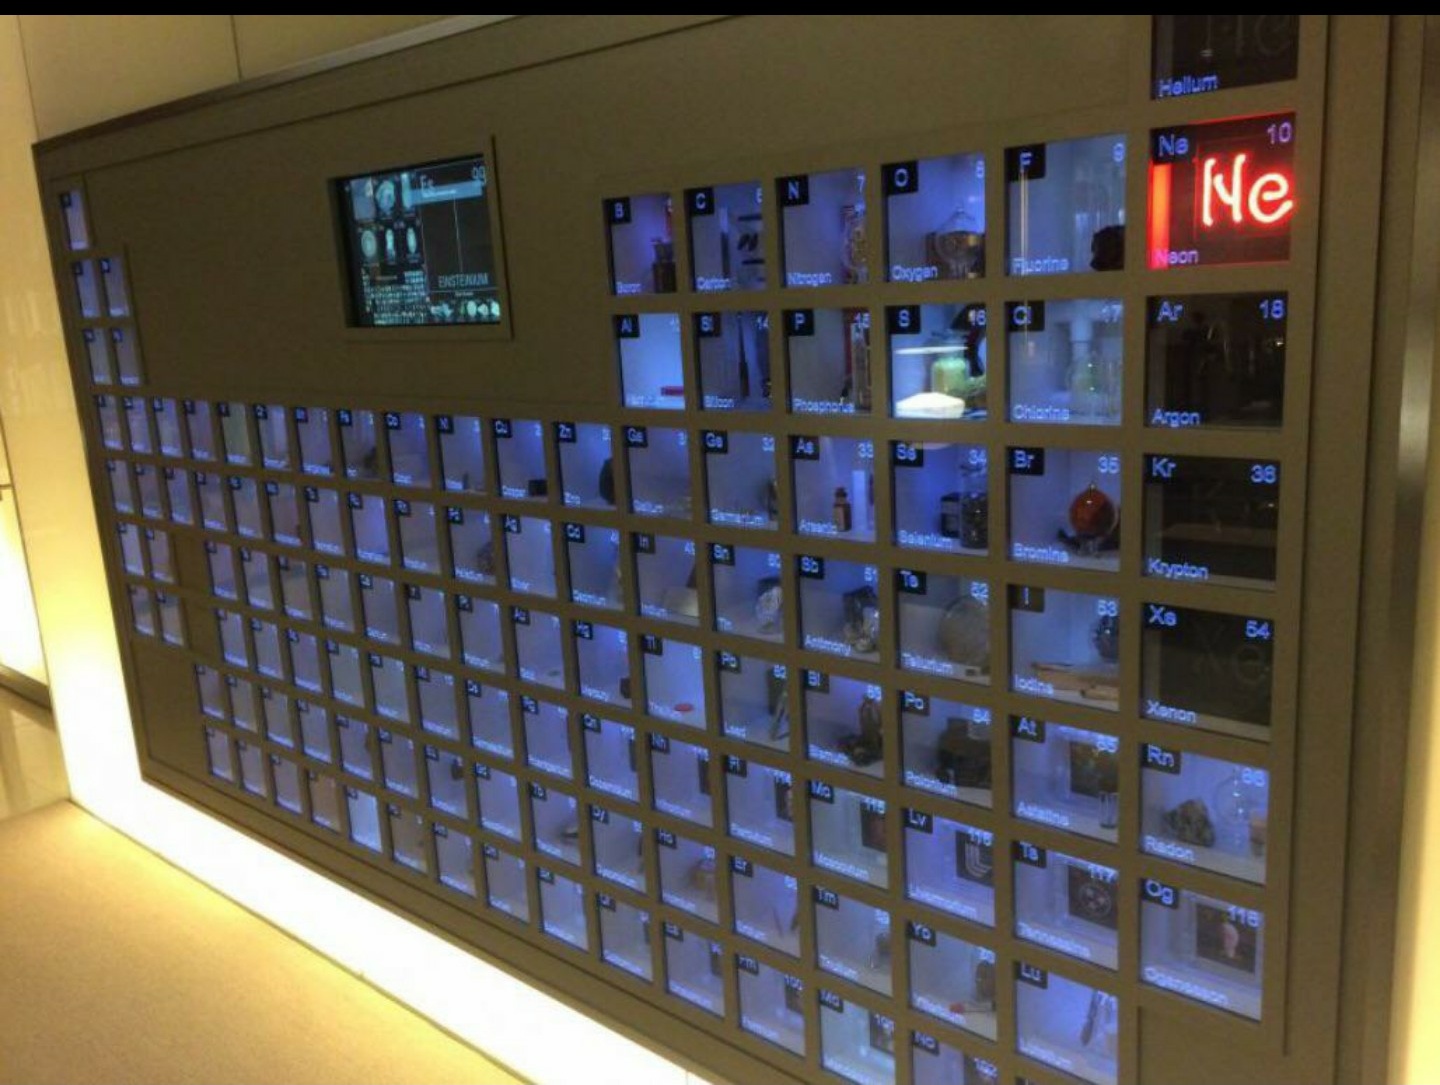 Bill+Gates+has+a+periodic+table+mounted+in+his+office+with+a+samples+of+each+element+inside+of+it